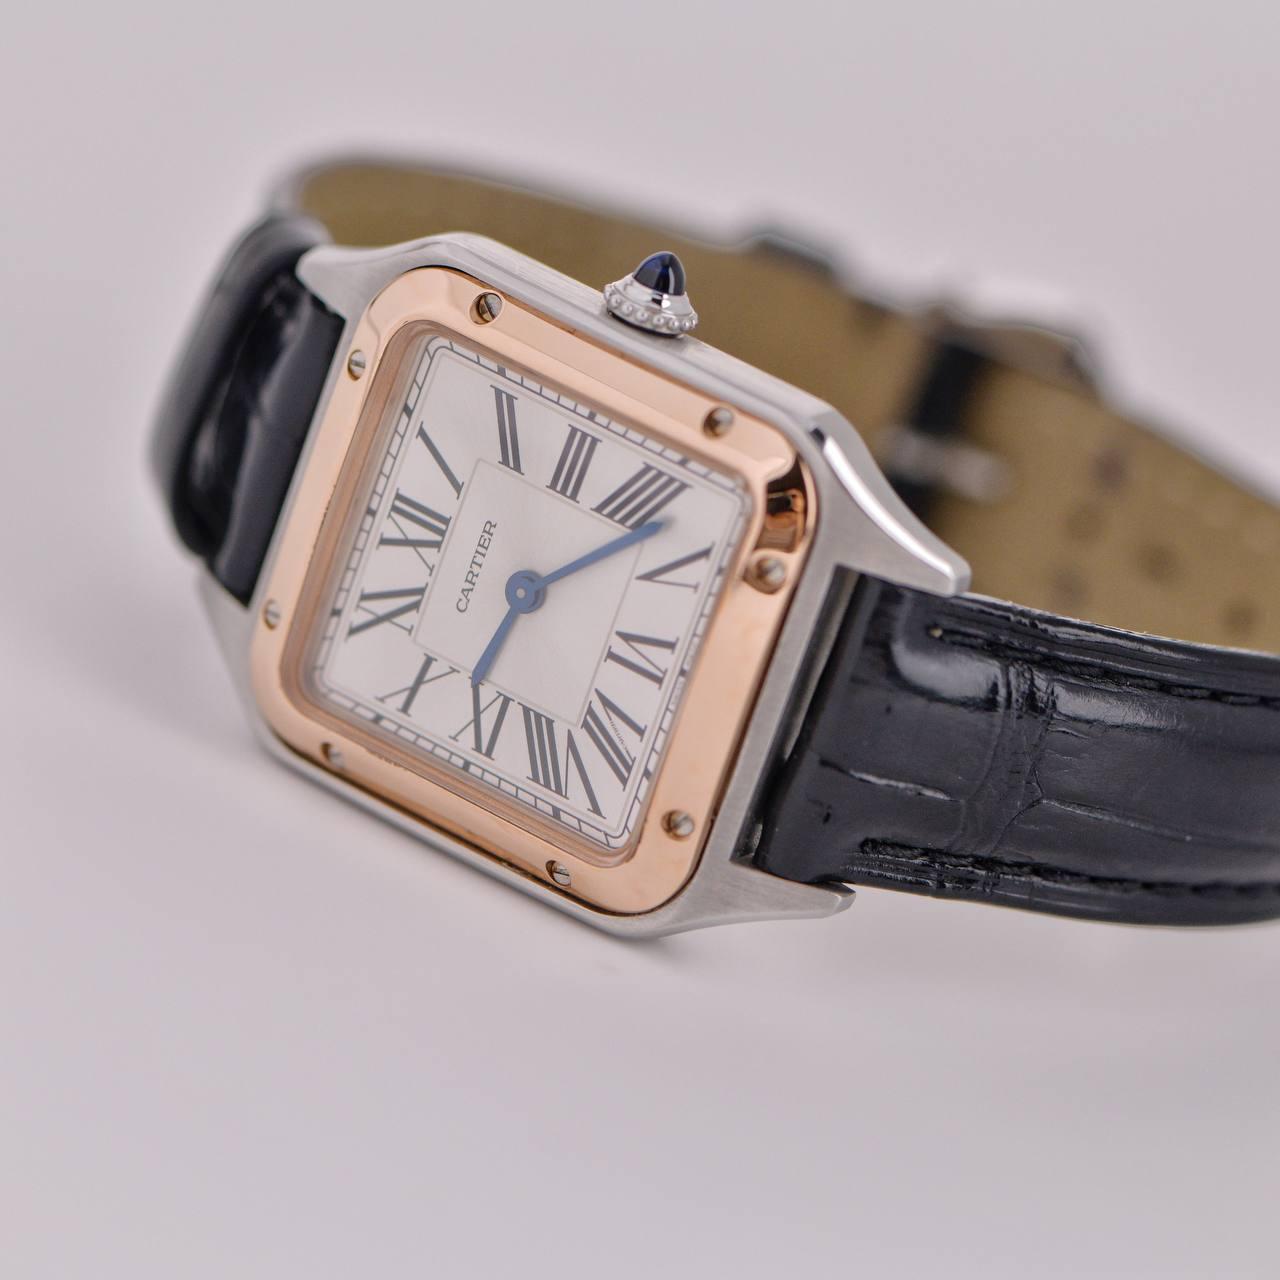 Cartier Santos-Dumont Watch Small Model W2SA0012 In Excellent Condition For Sale In Banbury, GB